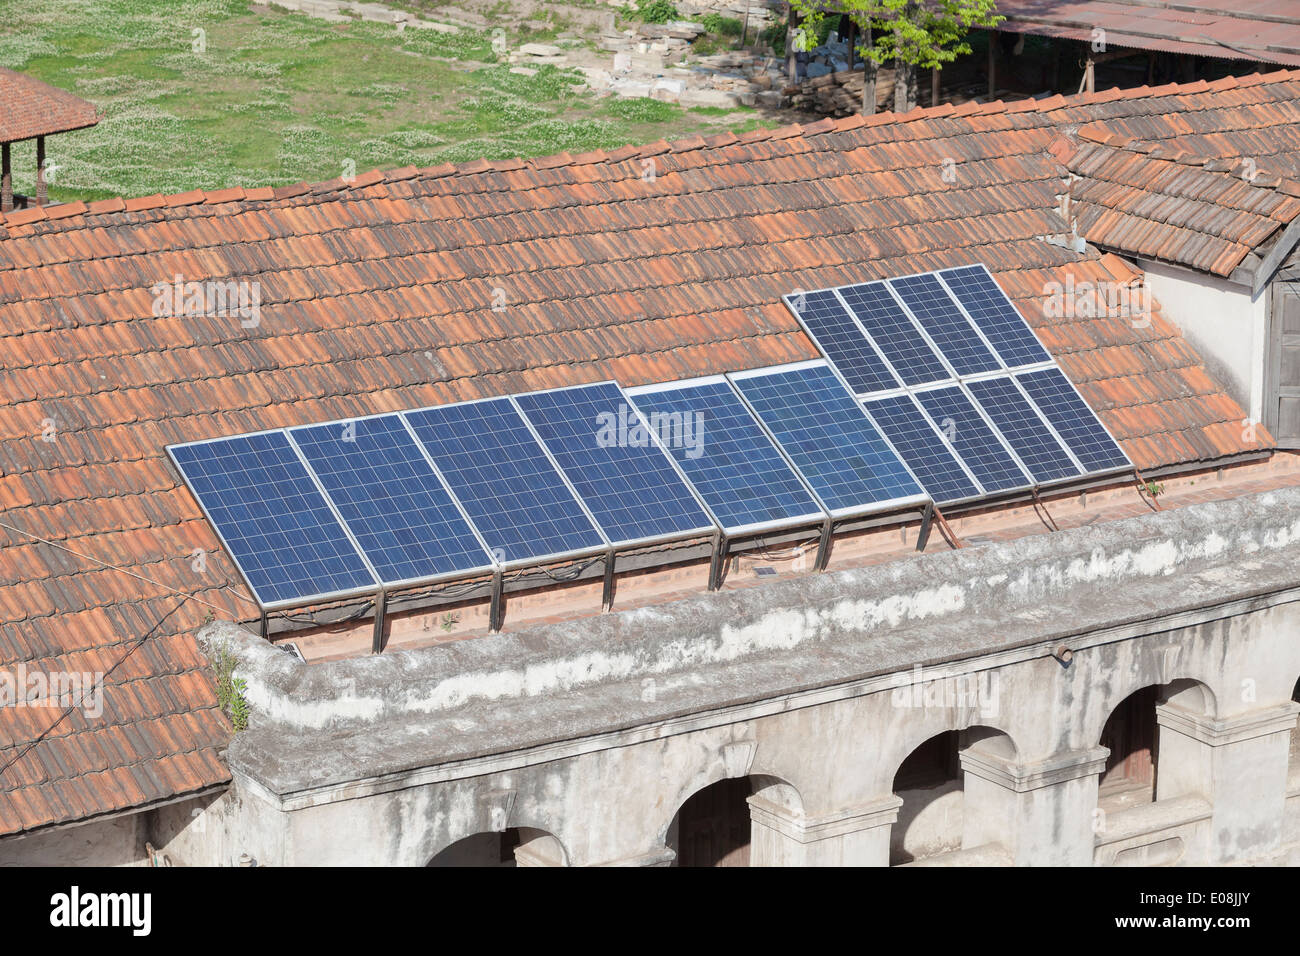 Photo voltaic or solar panels mounted on the roof of a house Stock Photo